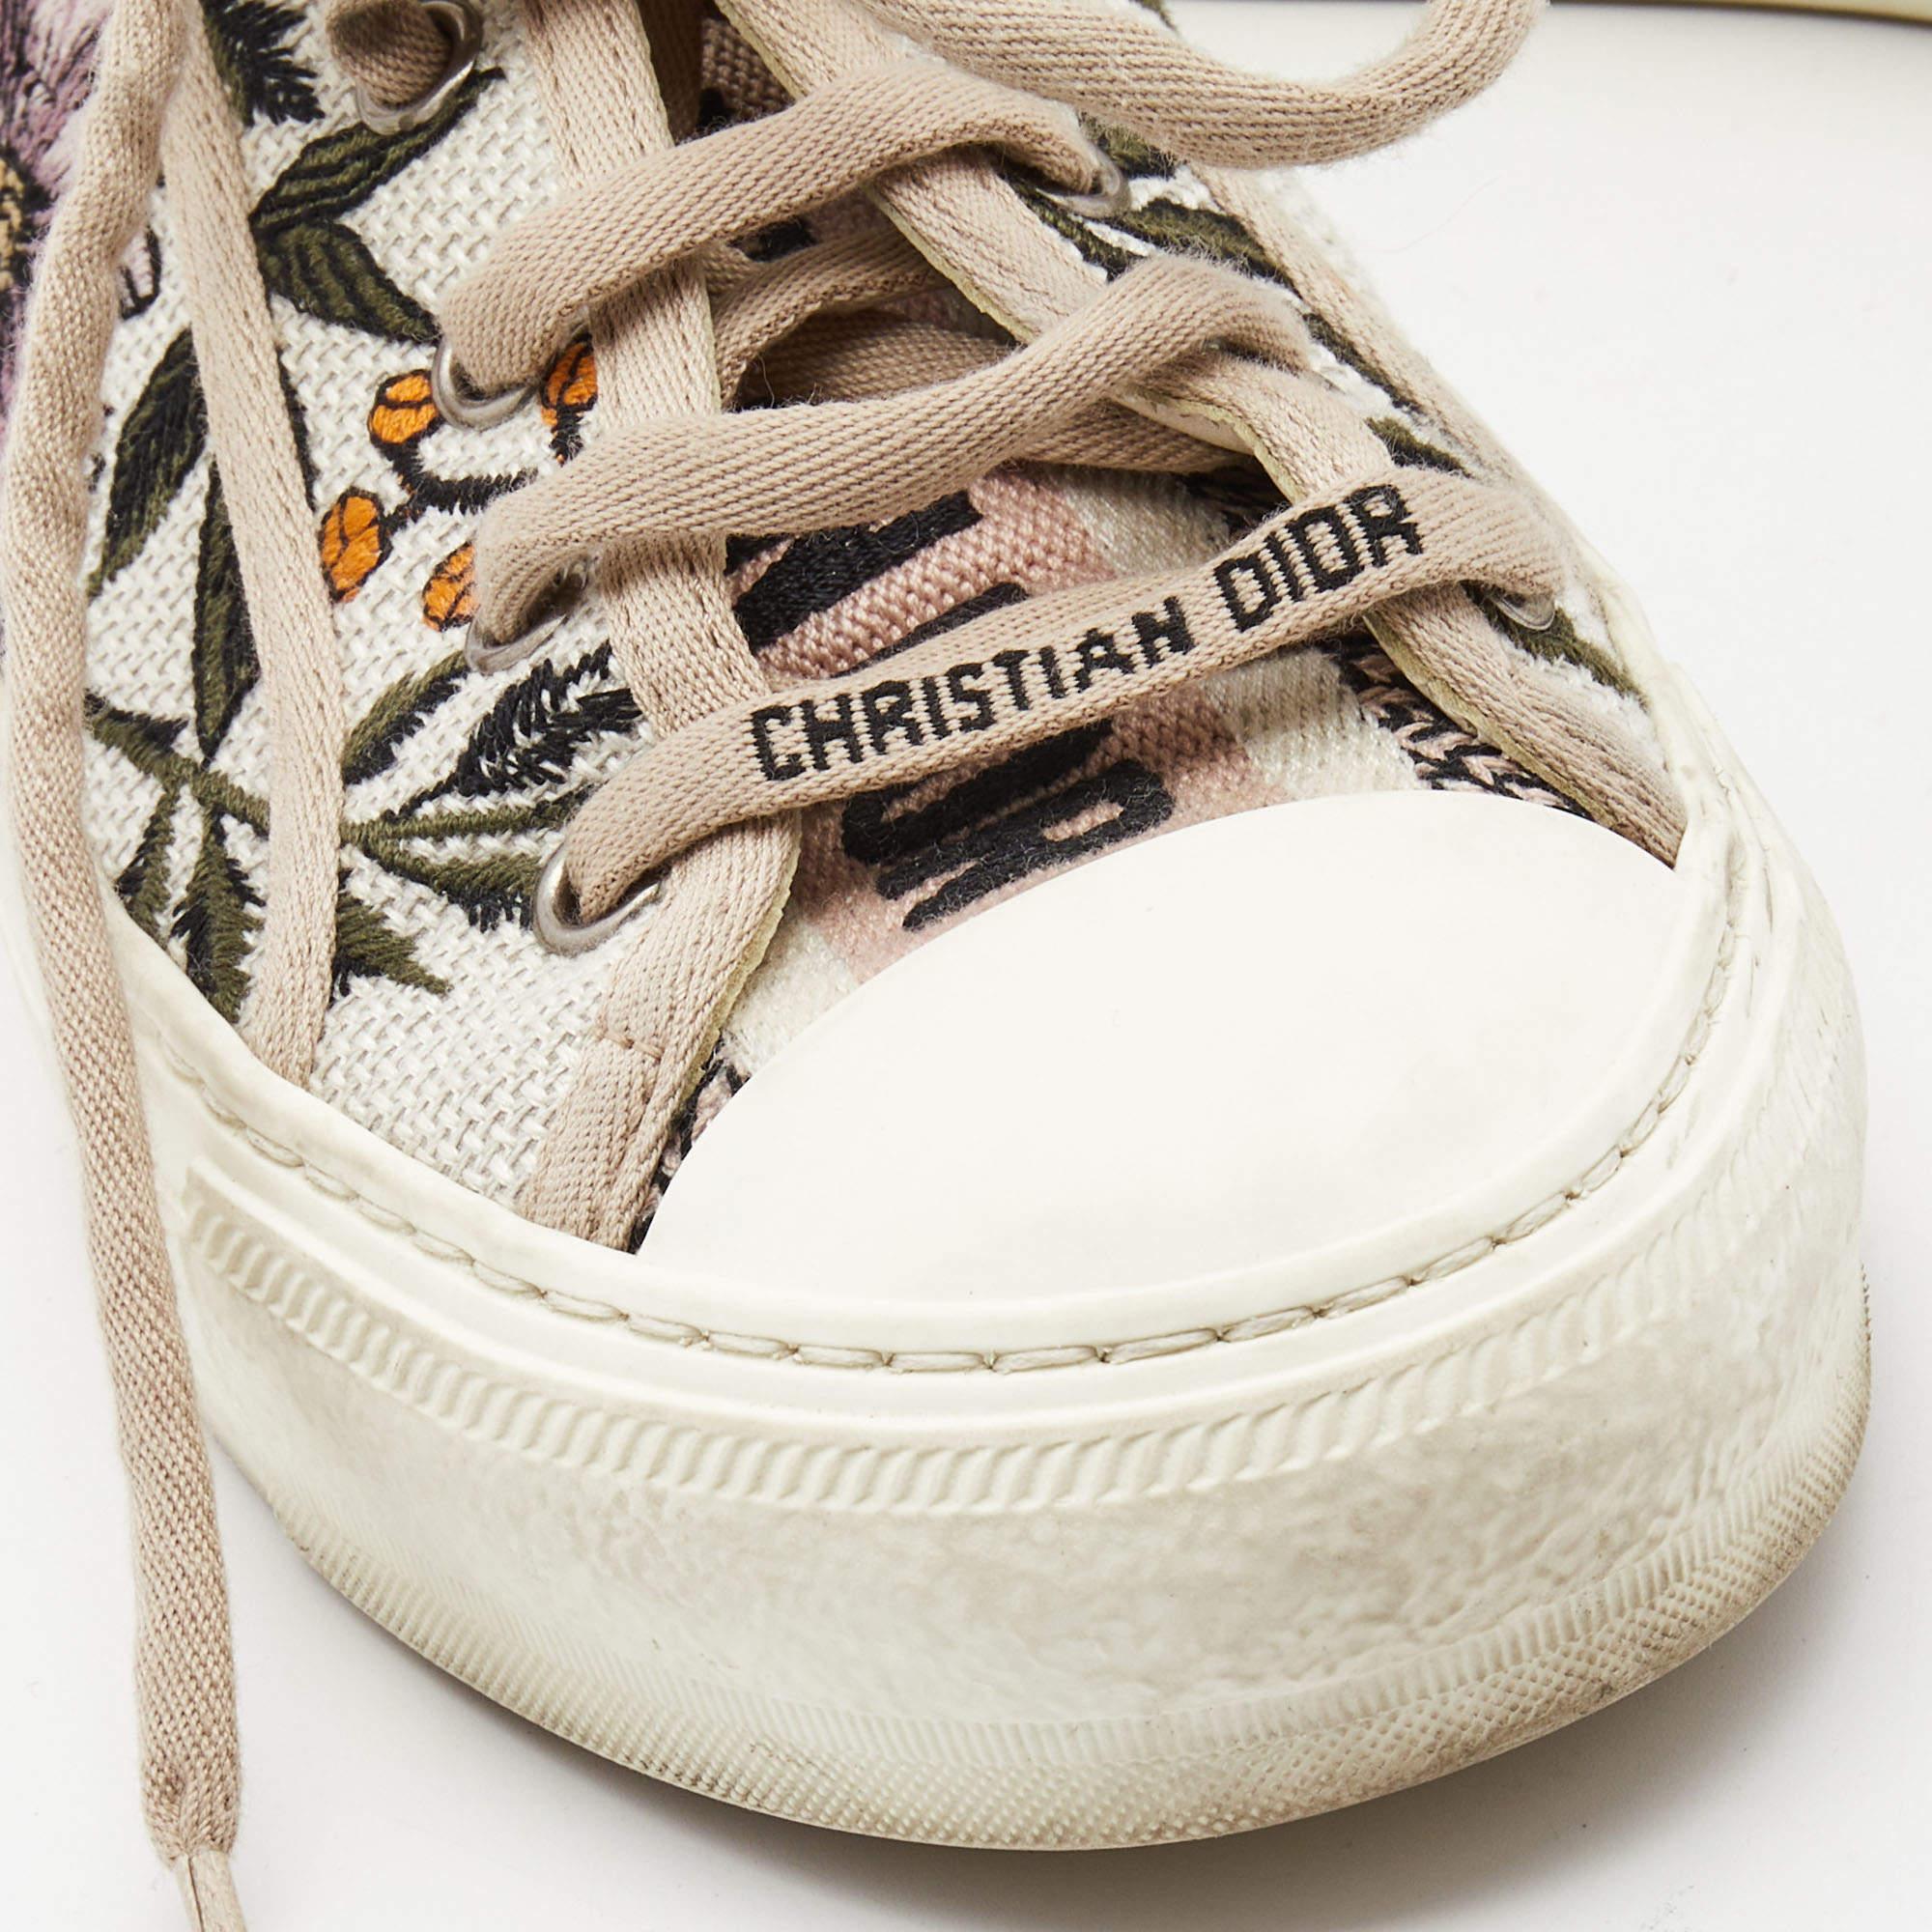 Dior White Embroidered Canvas Walk'n'Dior Sneakers Size 36 1